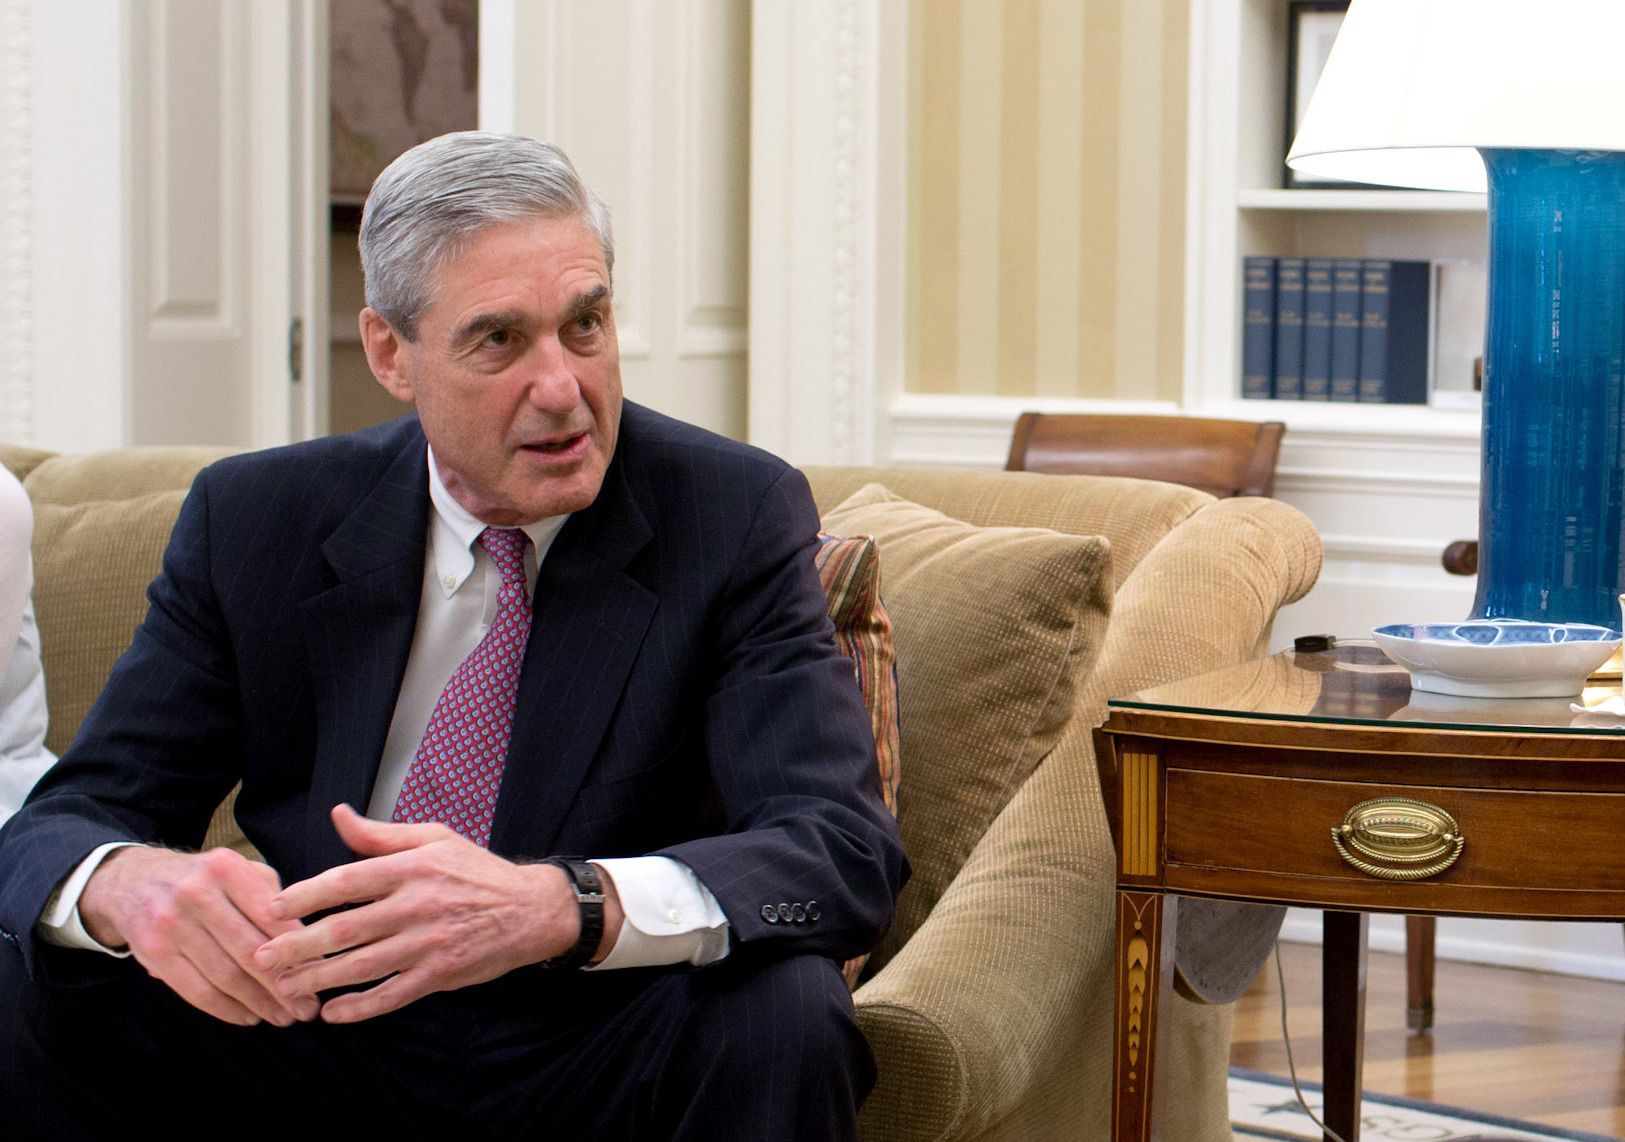 BREAKING: Mueller Finds NO COLLUSION Between Trump & Russia In 2016 Campaign